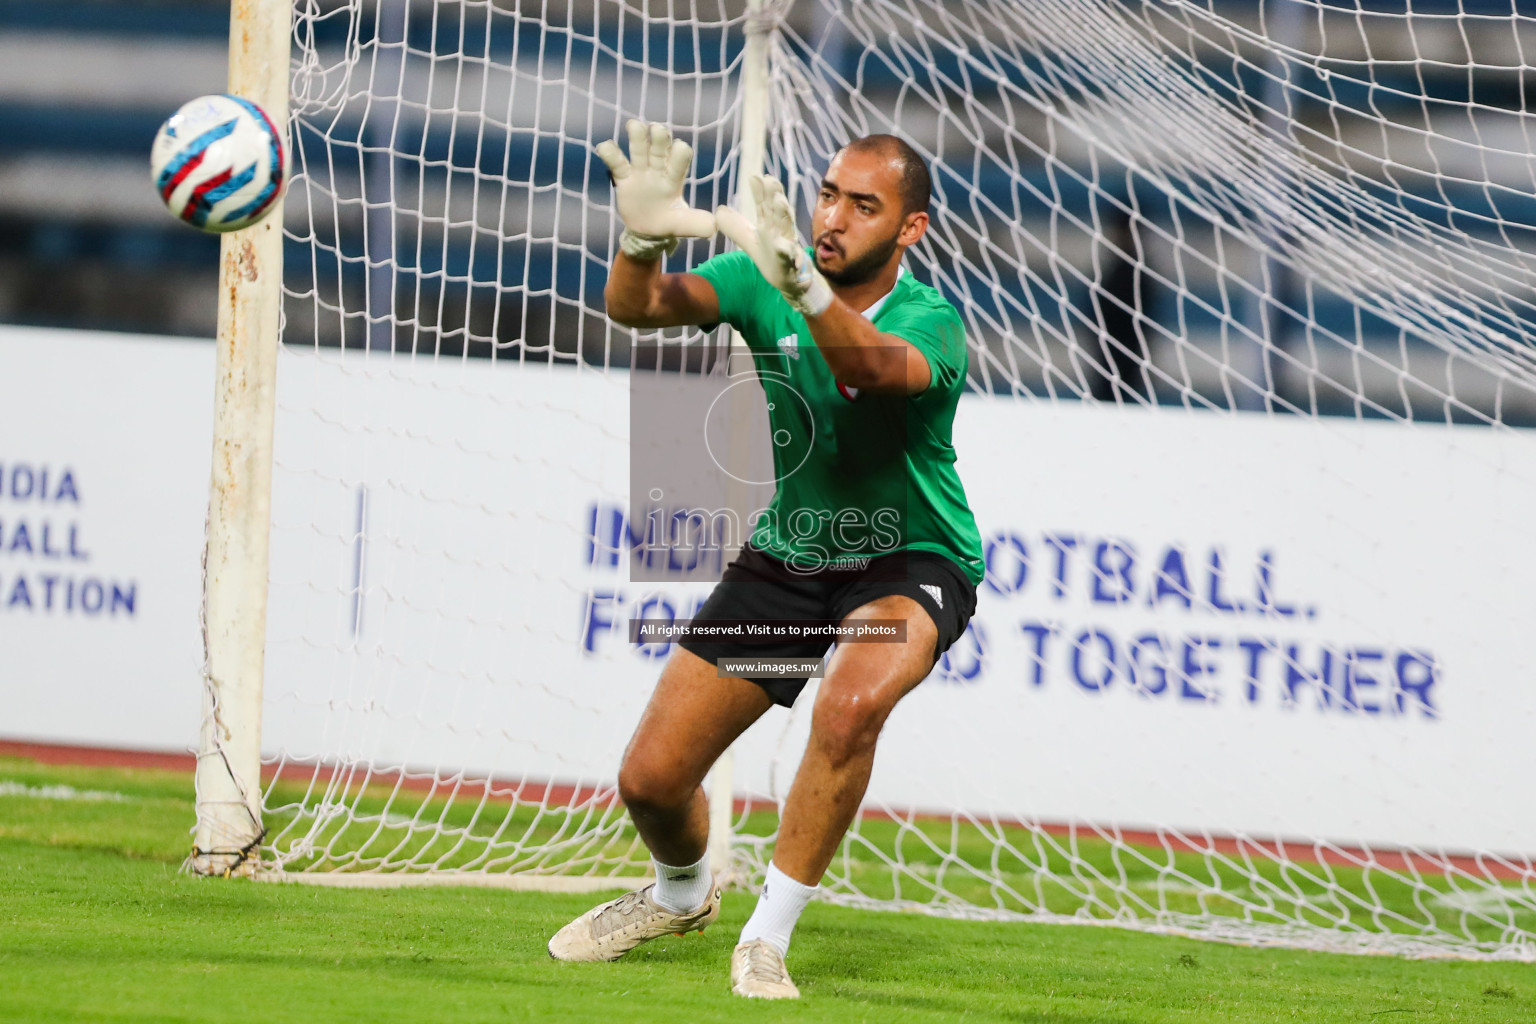 Kuwait vs India in the Final of SAFF Championship 2023 held in Sree Kanteerava Stadium, Bengaluru, India, on Tuesday, 4th July 2023. Photos: Hassan Simah / images.mv